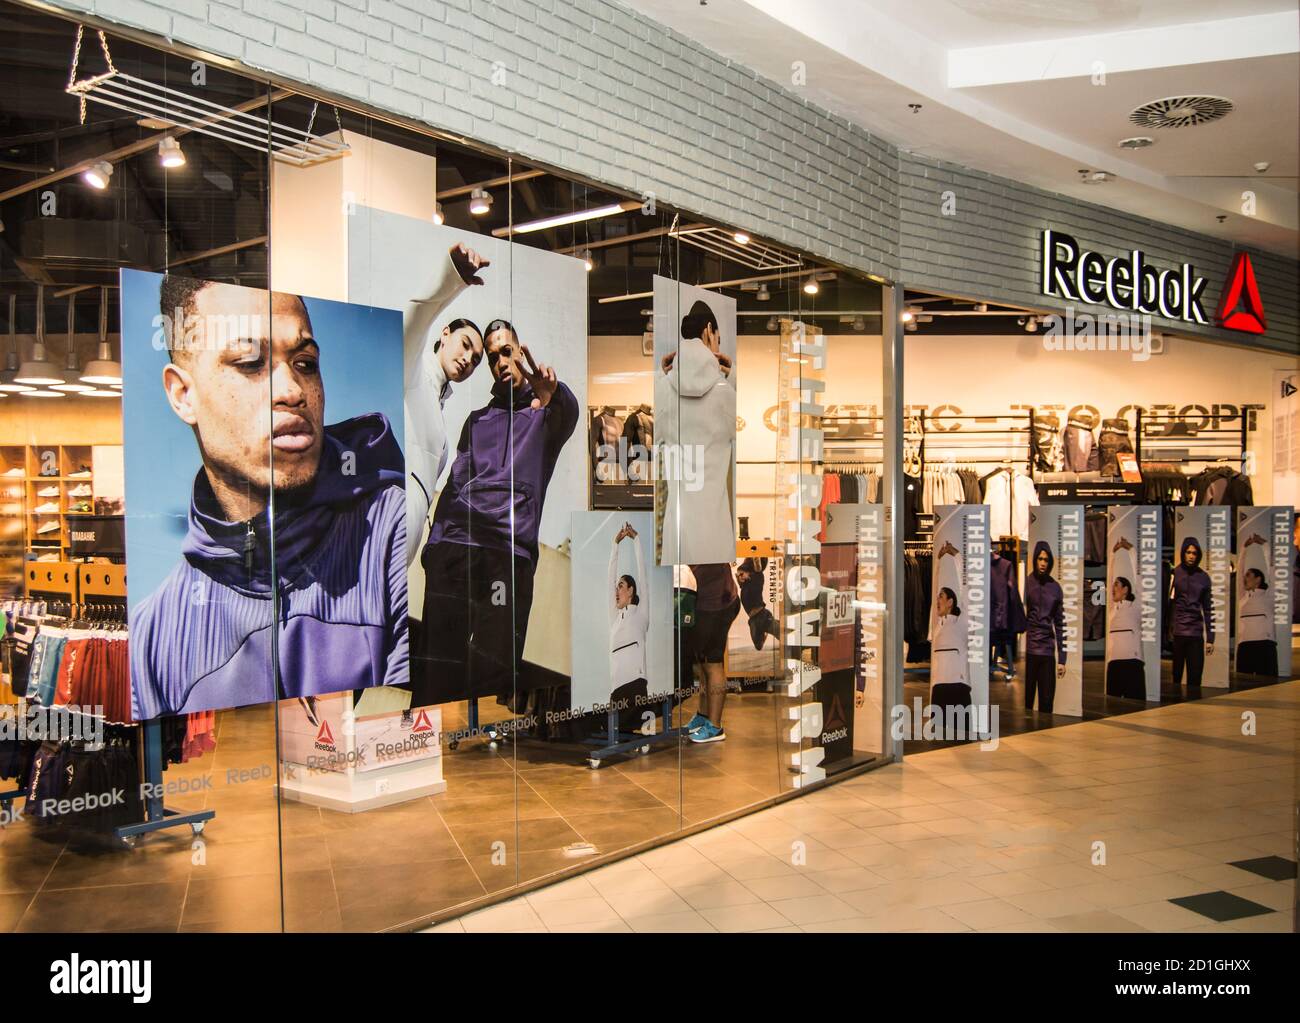 Reebok Store High Resolution Stock Photography and Images - Alamy